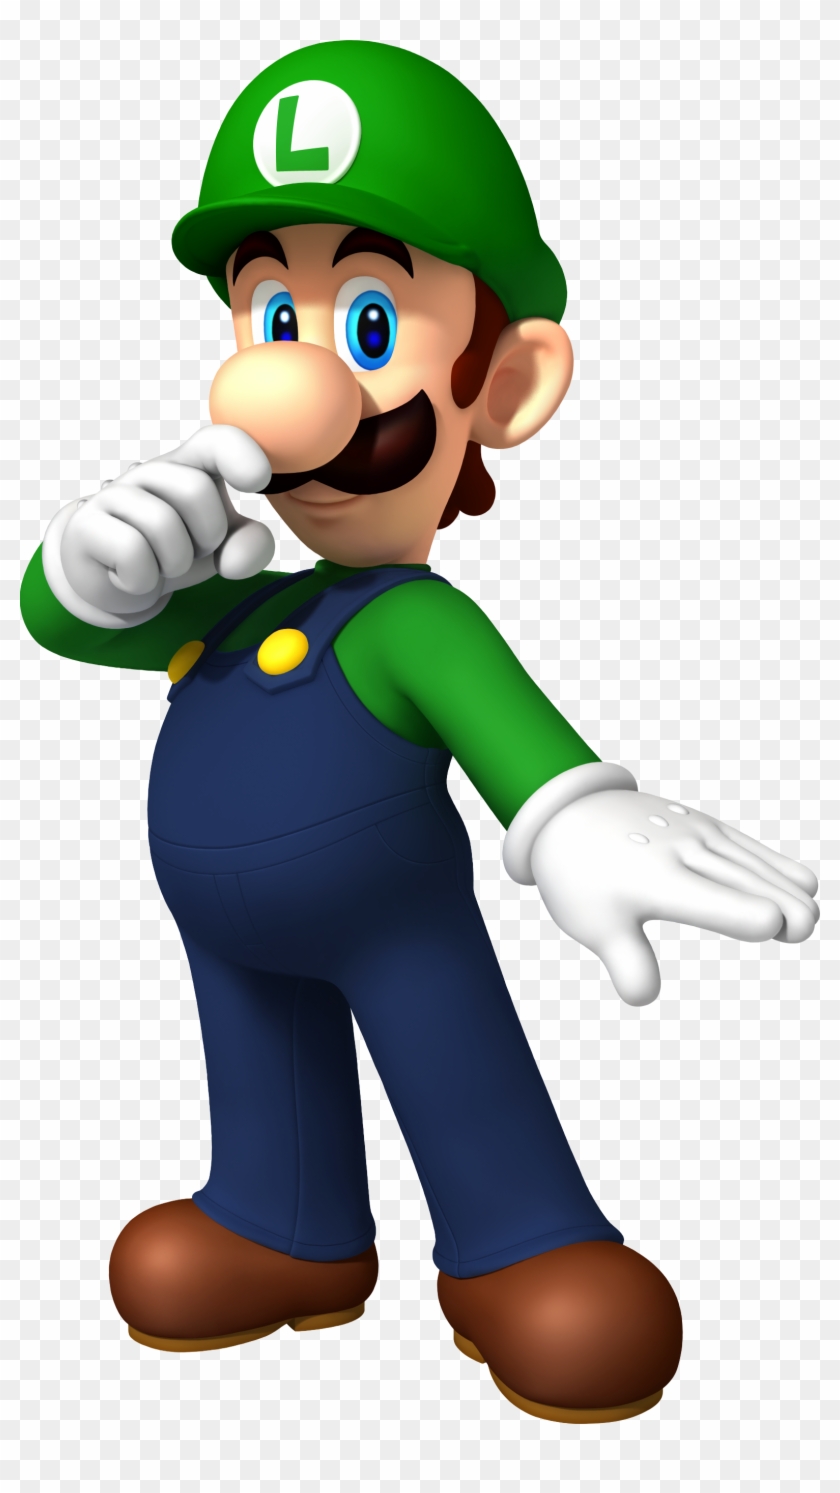 Luigi Is A Character From The Super Mario Series, And - Luigi Super Mario Kart #1106464